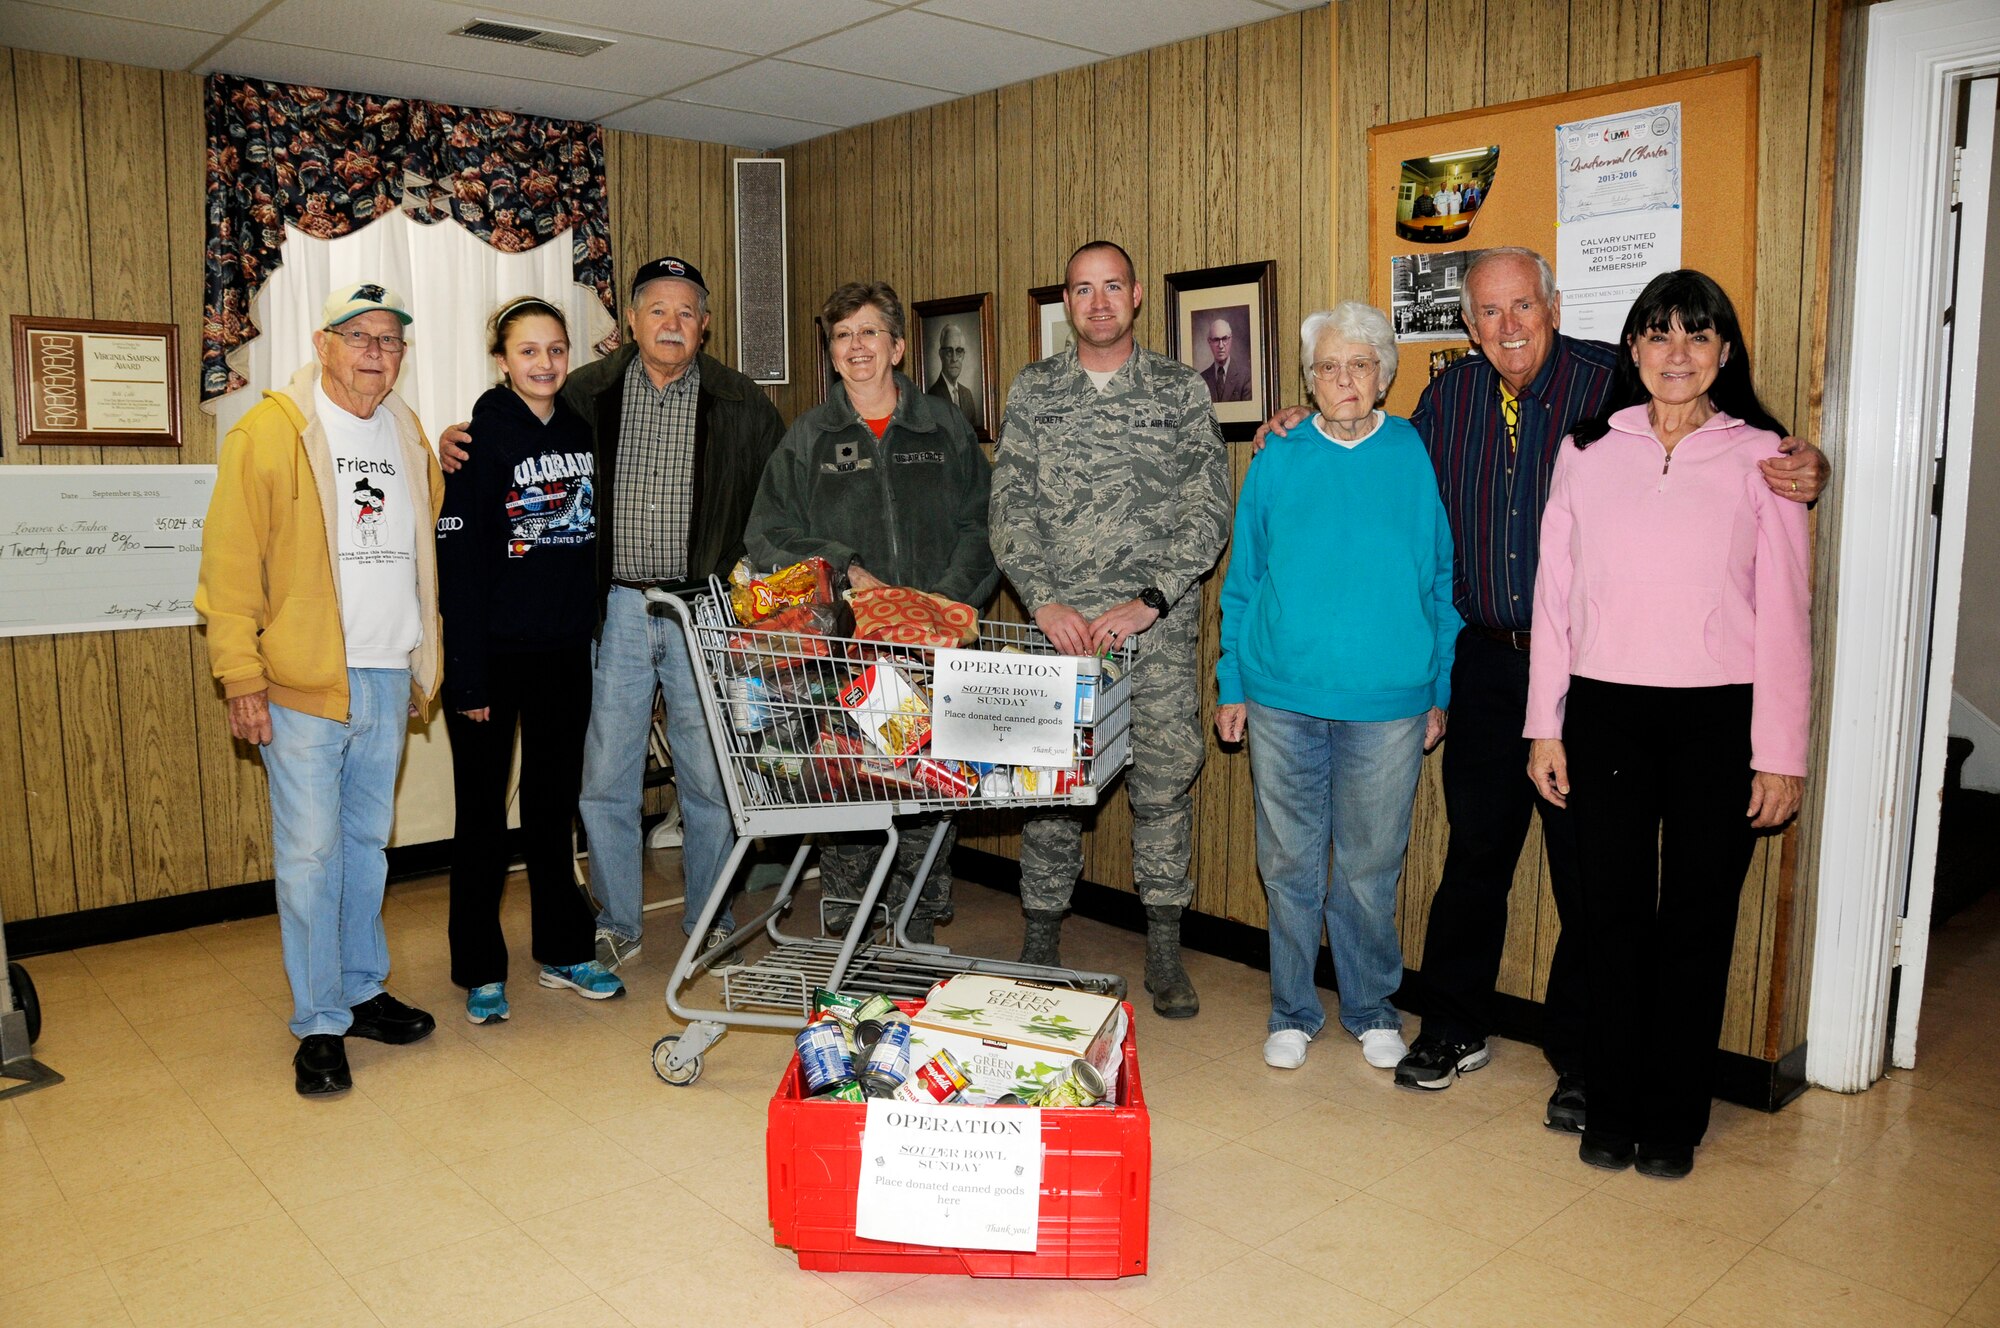 U.S. Air Force Tech. Sgt. Dennis Puckett and 145th Wing Chaplain (Lt. Col.) Debra Kidd from the North Carolina Air National Guard, stand with volunteers after dropping off food items at the Loaves and Fishes food pantry in Charlotte, N.C., Feb. 12, 2016. During February’s Unit Training Assembly, Airmen celebrated the Carolina Panthers and Super Bowl Sunday by participating in “Souper” Bowl. “Souper Bowl of Caring” utilizes Super Bowl weekend to rally people together in an effort to help fight hunger and poverty in their local communities. (U.S. Air National Guard photo by Master Sgt. Patricia F. Moran/Released)